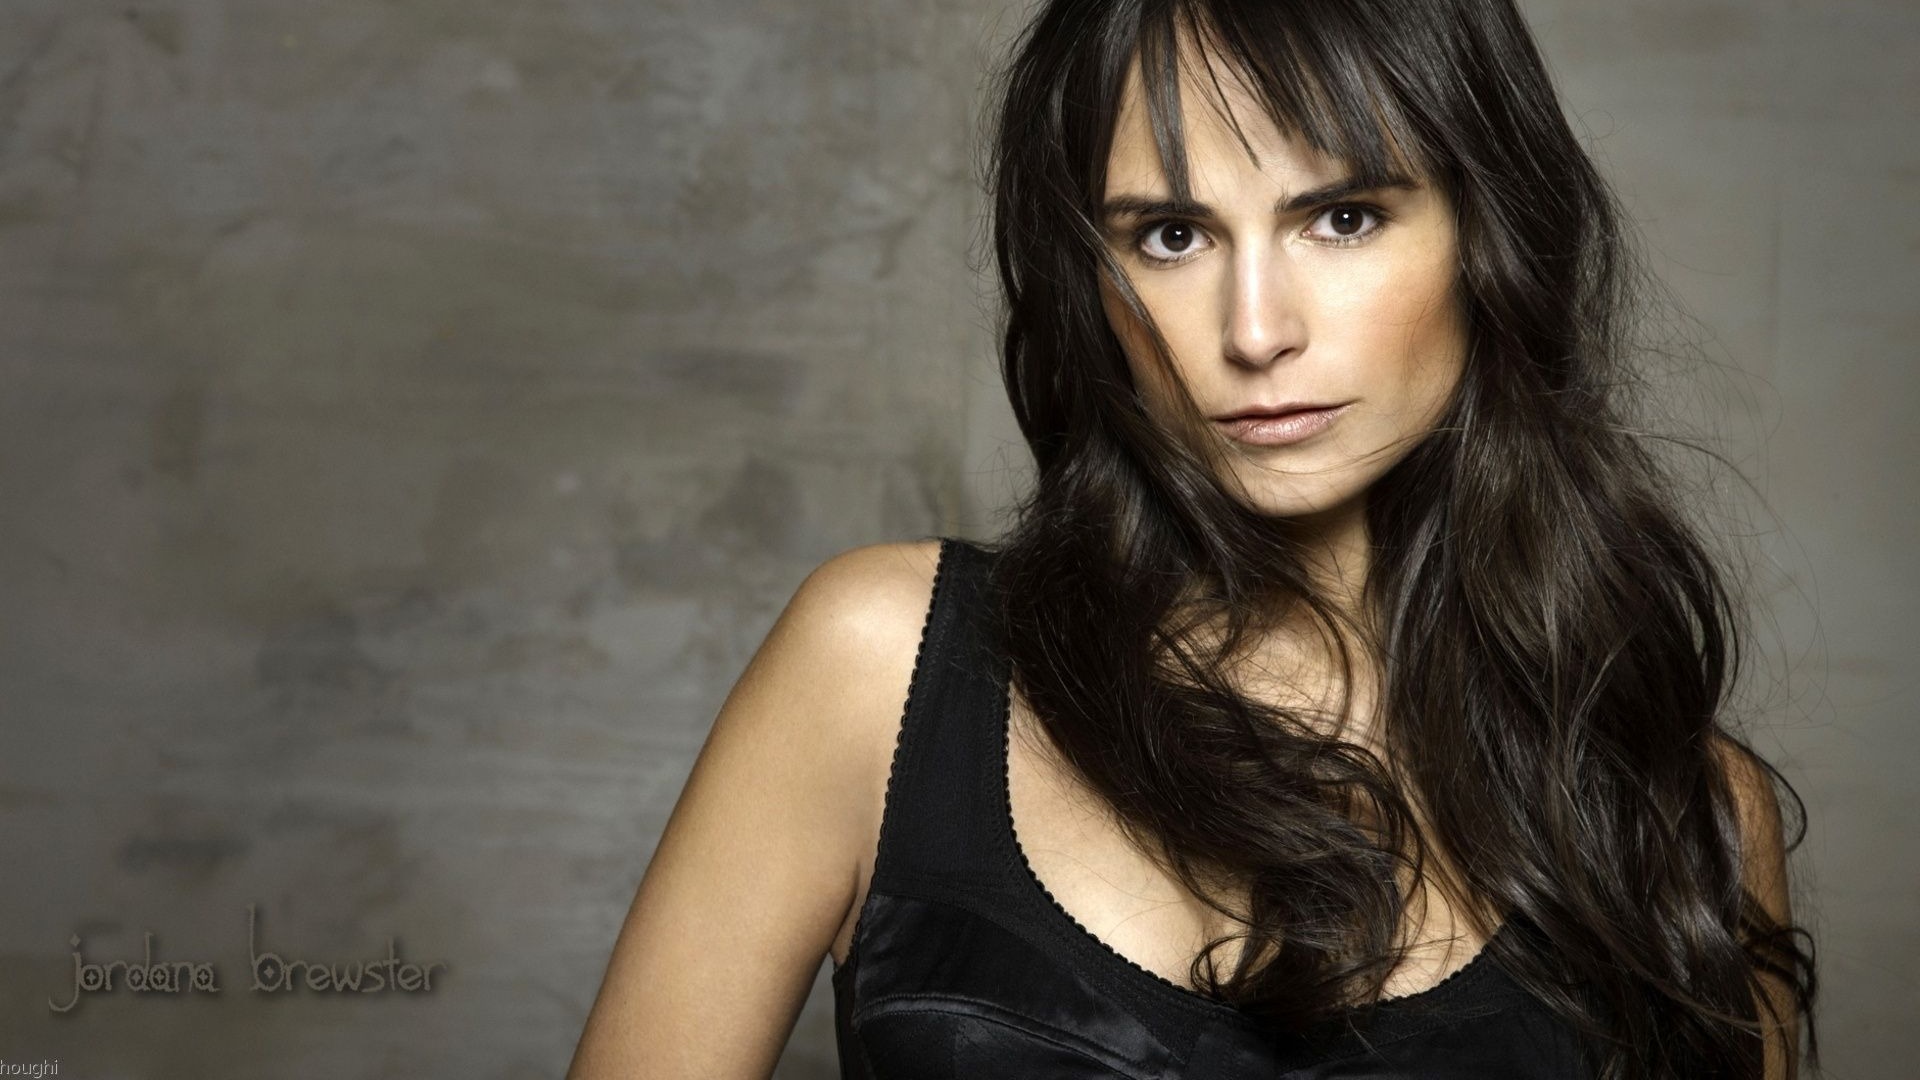 Jordana Brewster #013 - 1920x1080 Wallpapers Pictures Photos Images